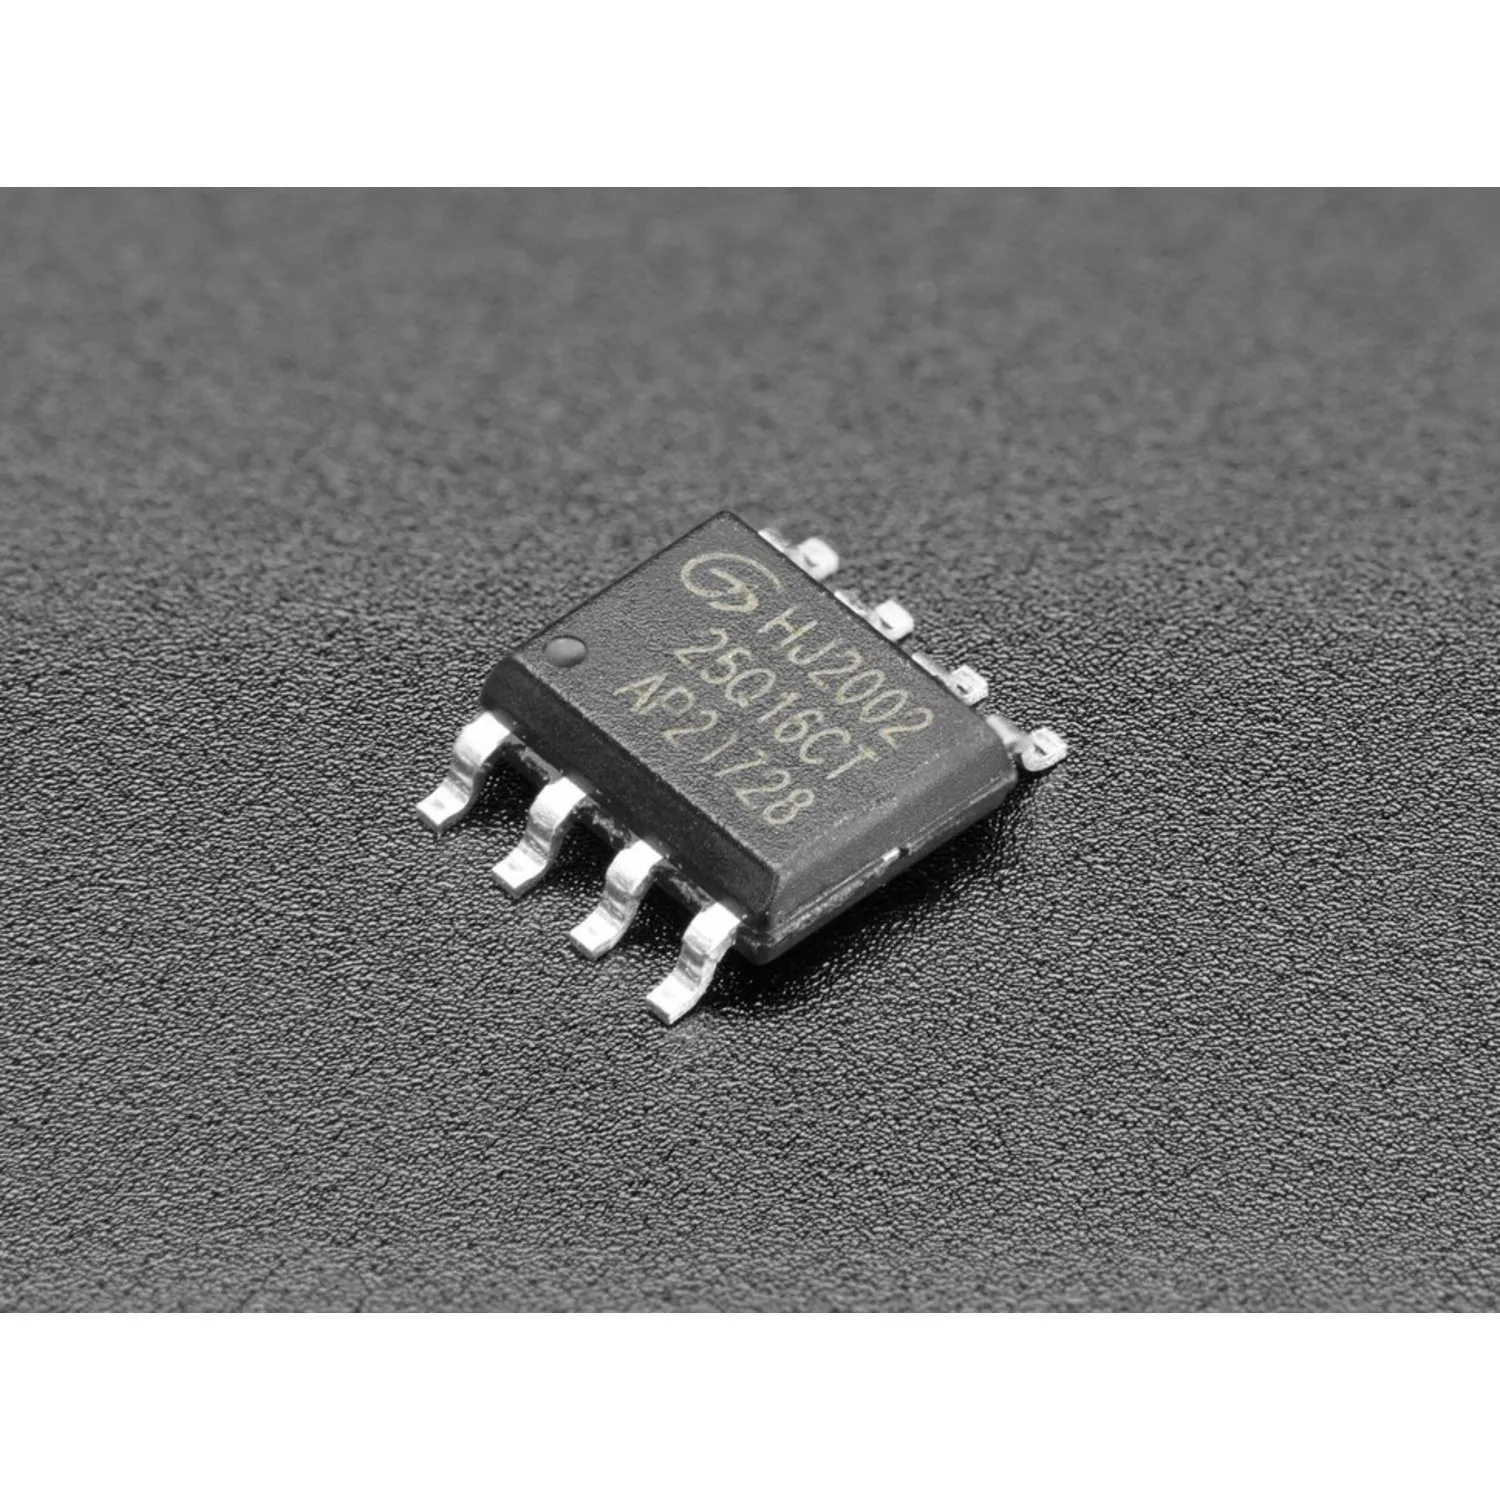 Photo of GD25Q16 - 2MB SPI Flash in 8-Pin SOIC package